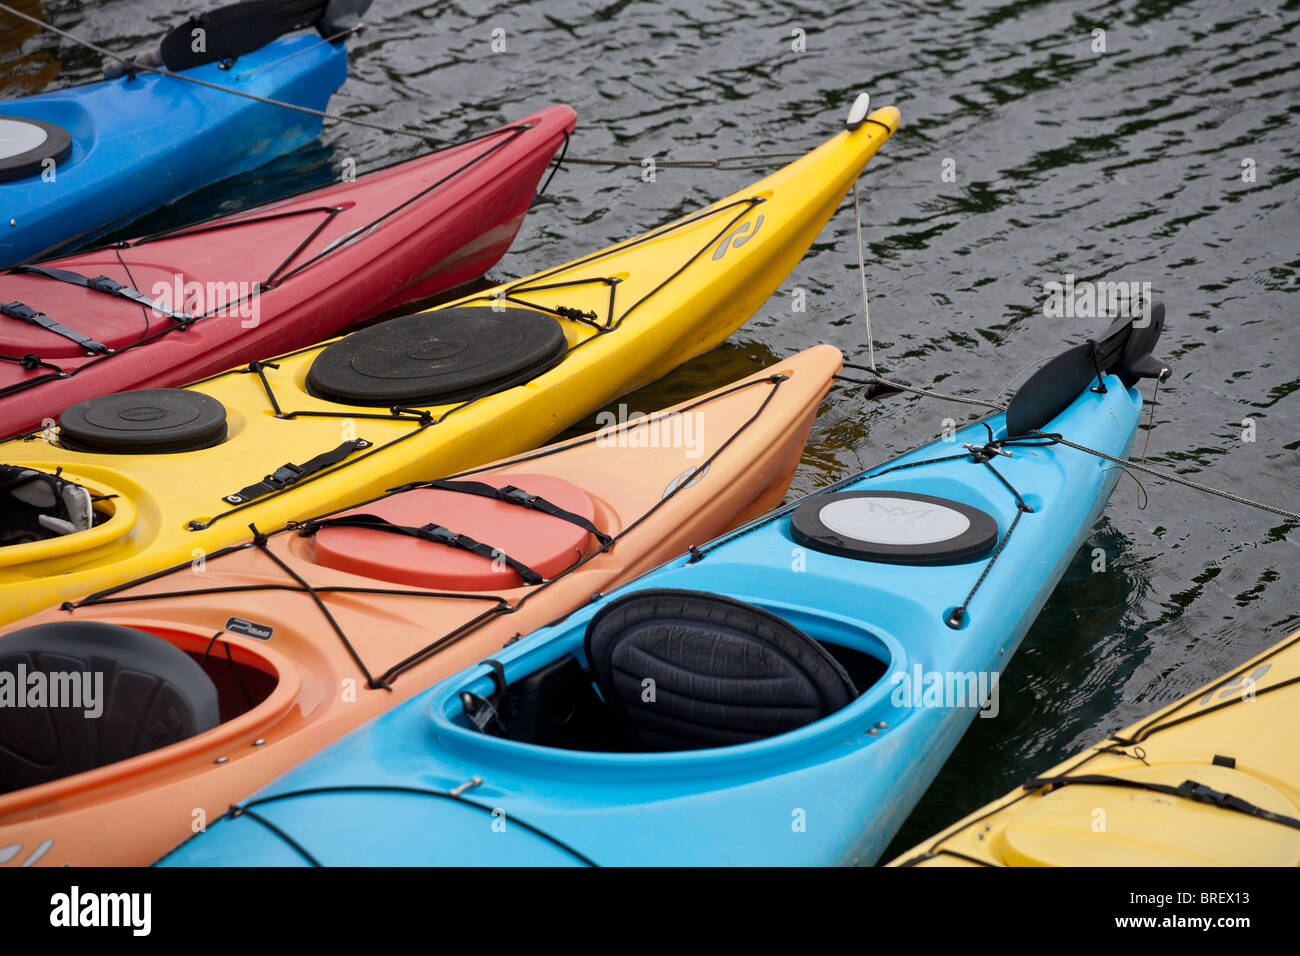 Colourful kayaks tied up in black water waiting for renters.. A pontoon of at least 6 kayaks await customers Stock Photo